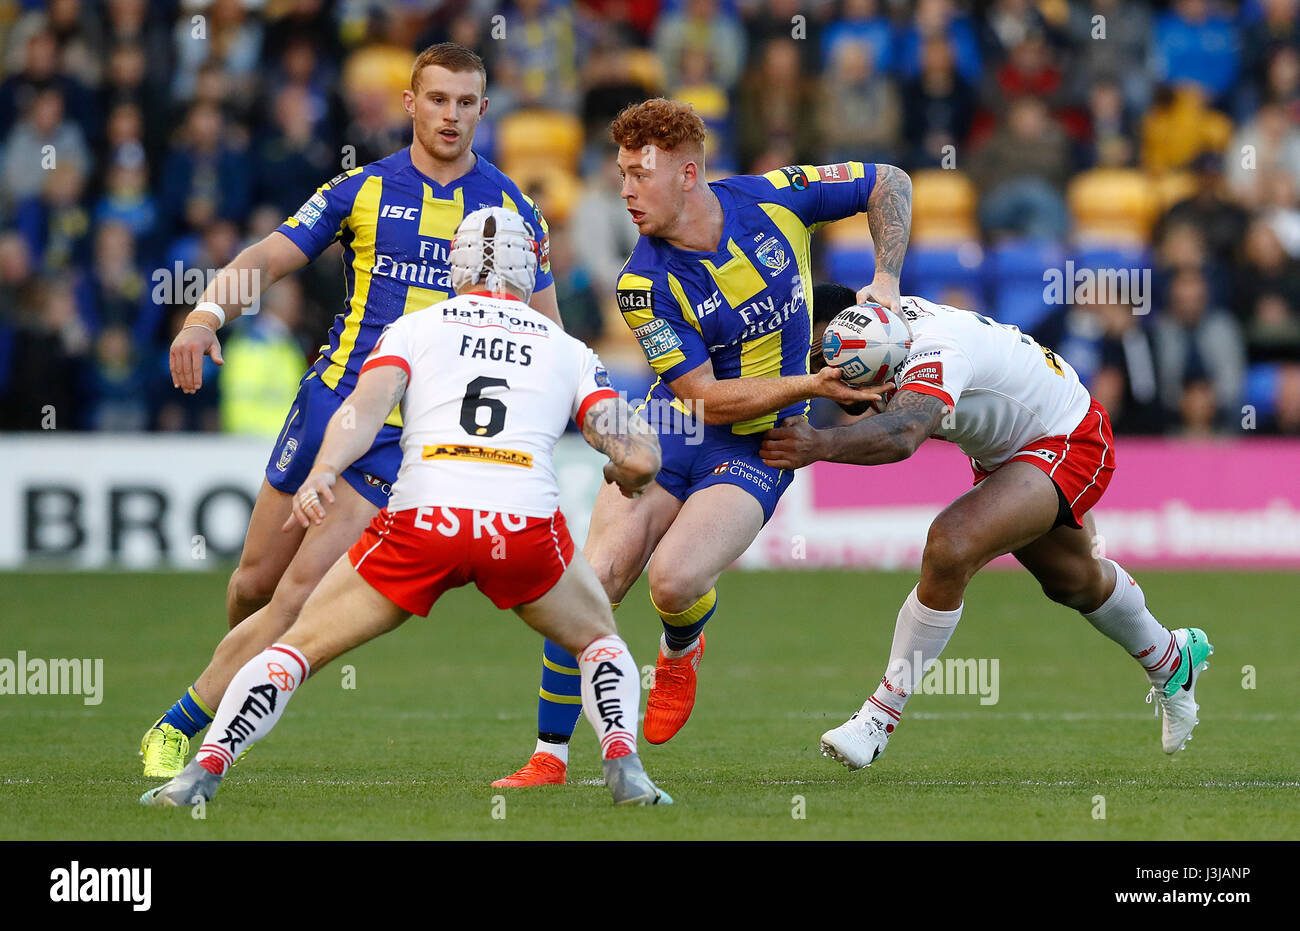 Warrington Wolves' Harvey Livett is tackled by St Helens' Zeb Taia during the Betfred Super League match at the Halliwell Jones Stadium, Warrington. Stock Photo